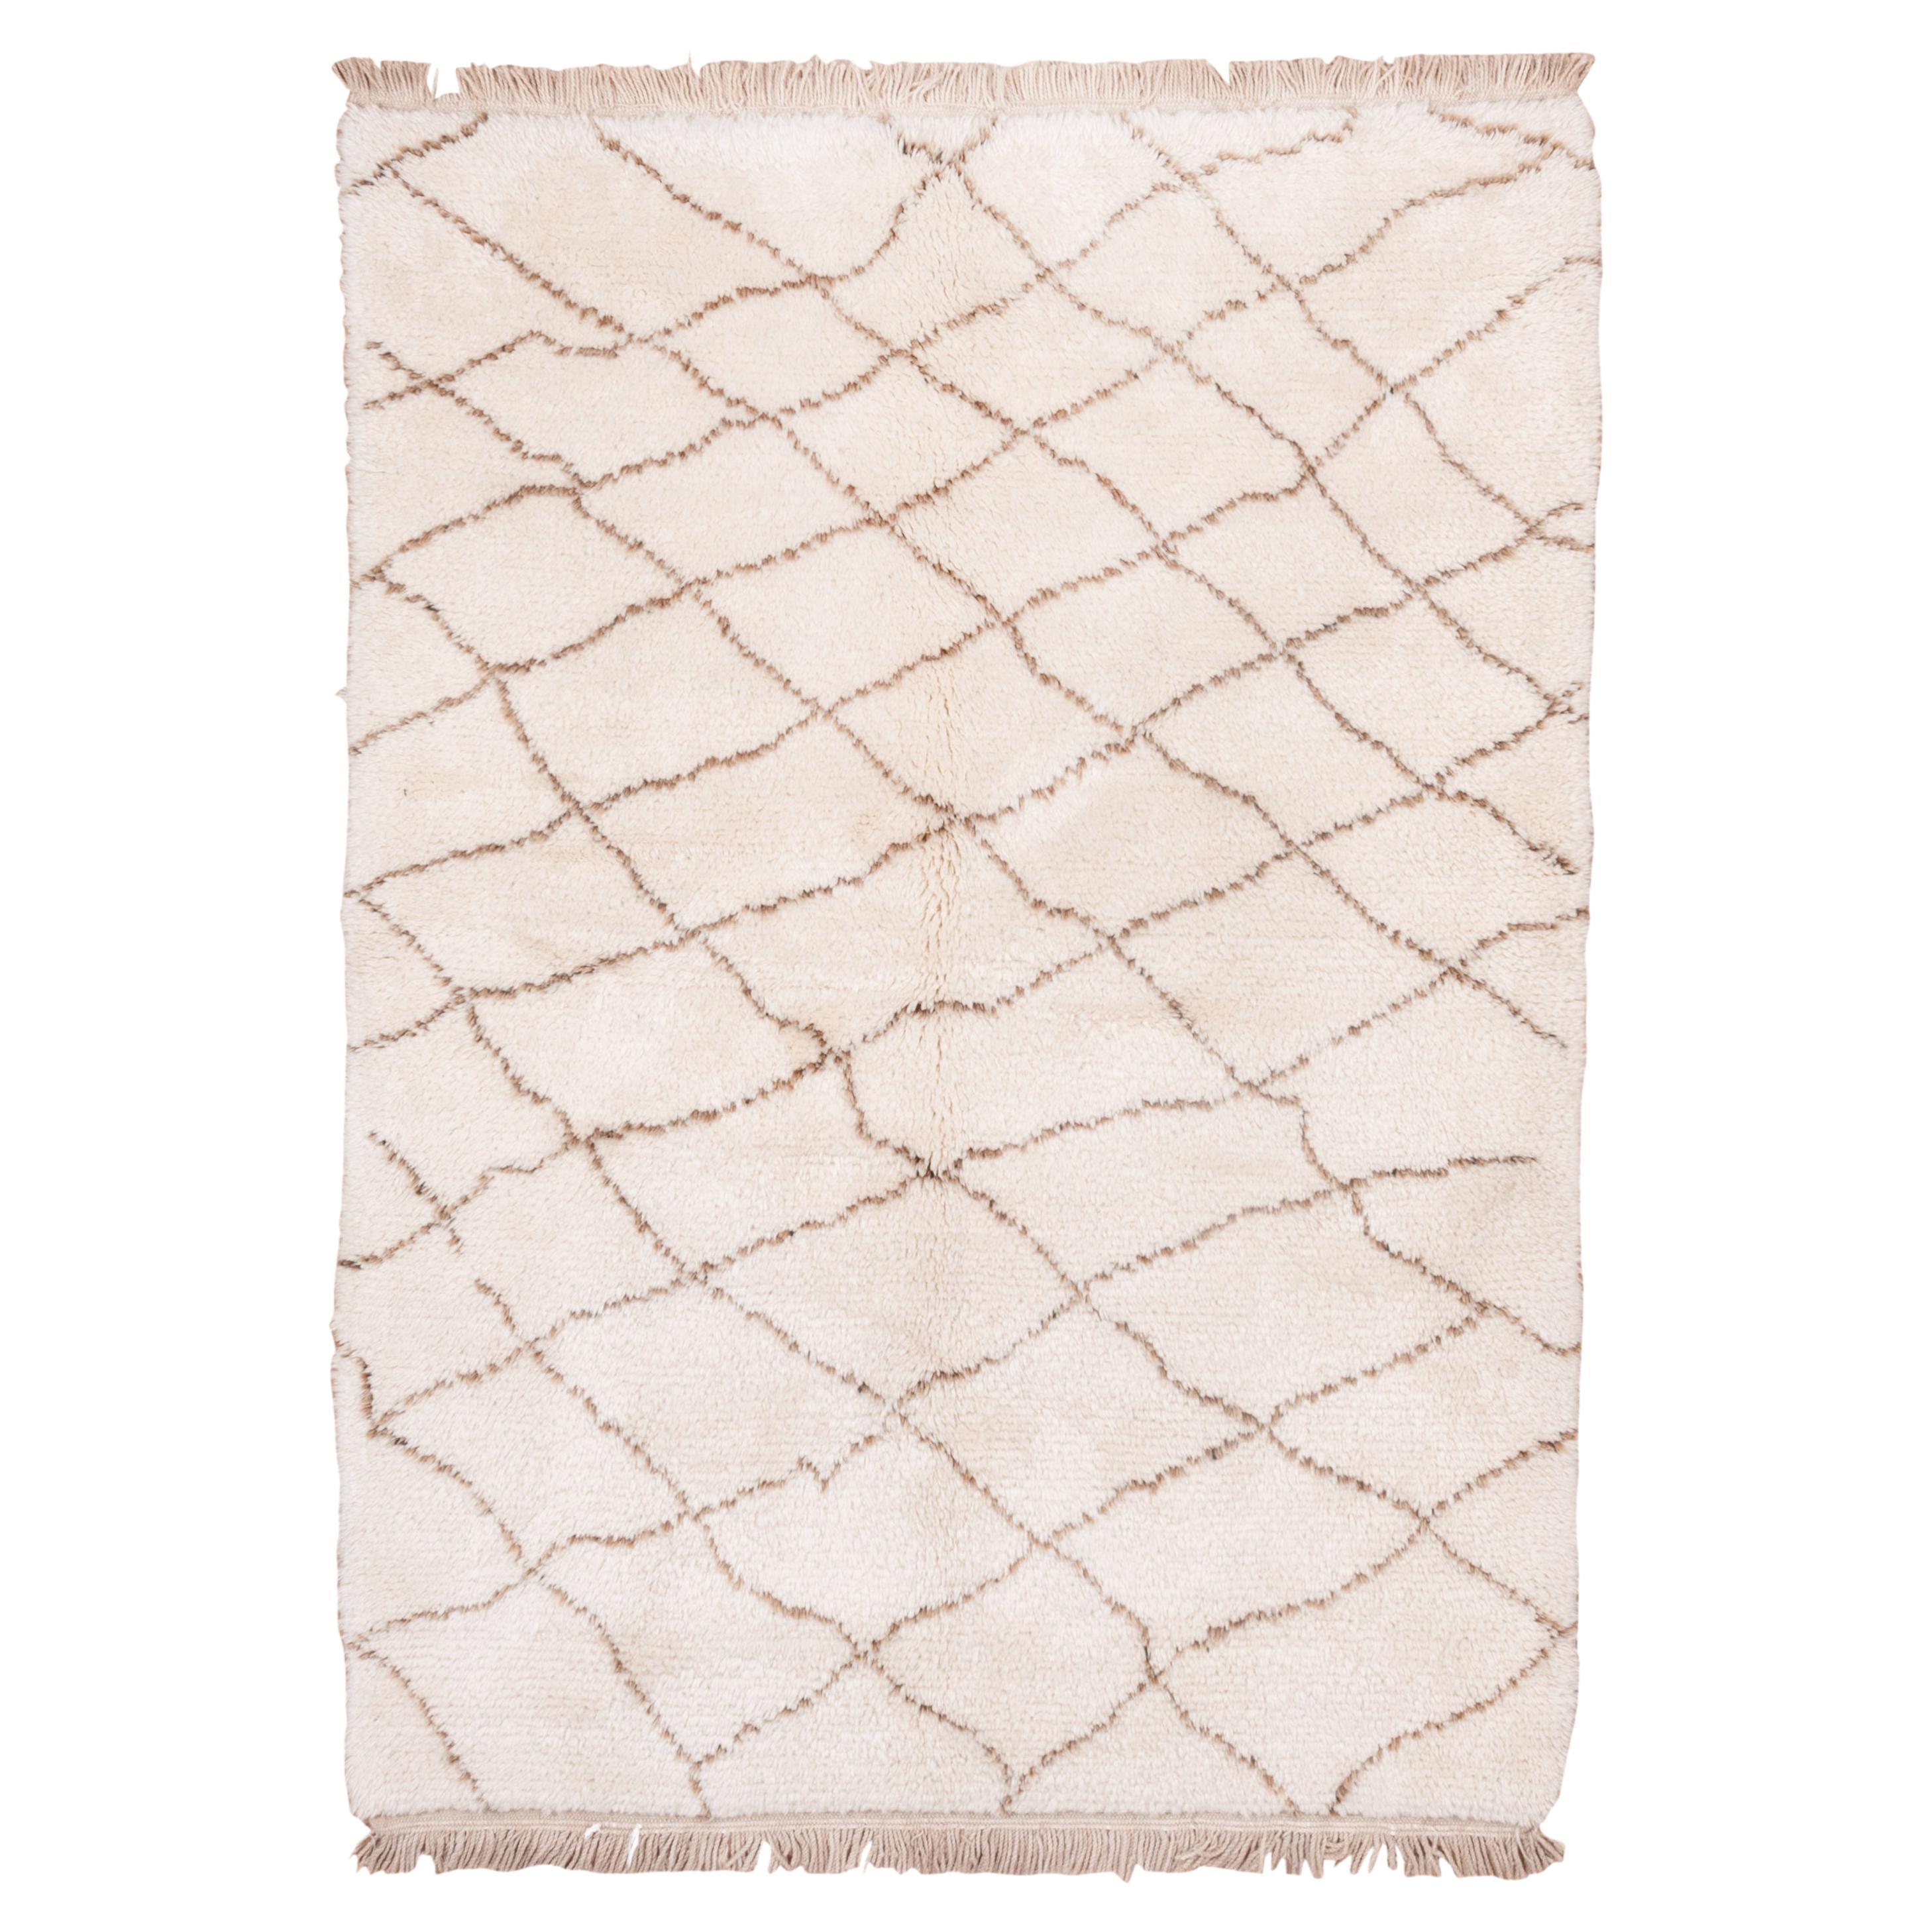 Neutral Handknotted Moroccan Style Area Rug, Thick & Silky Pile For Sale